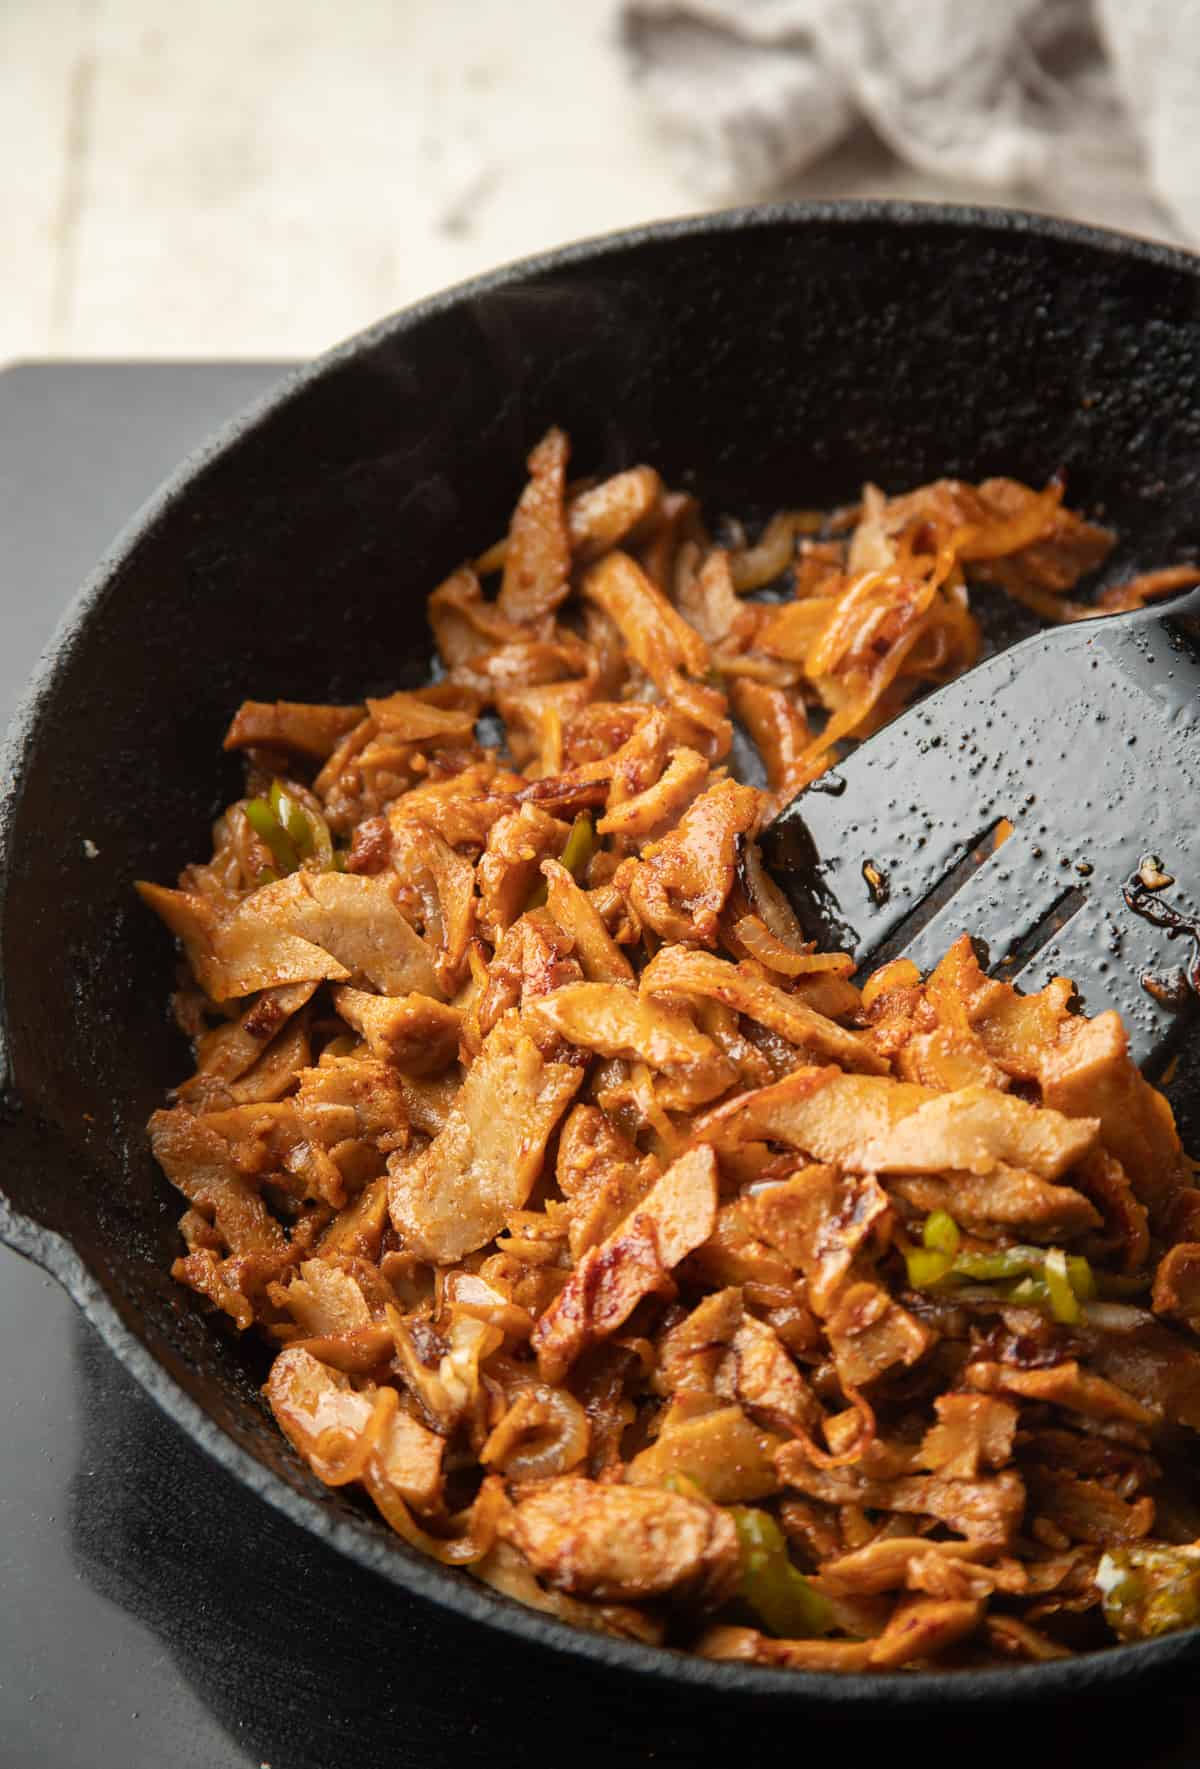 Seitan, onions and peppers sizzling in a skillet.